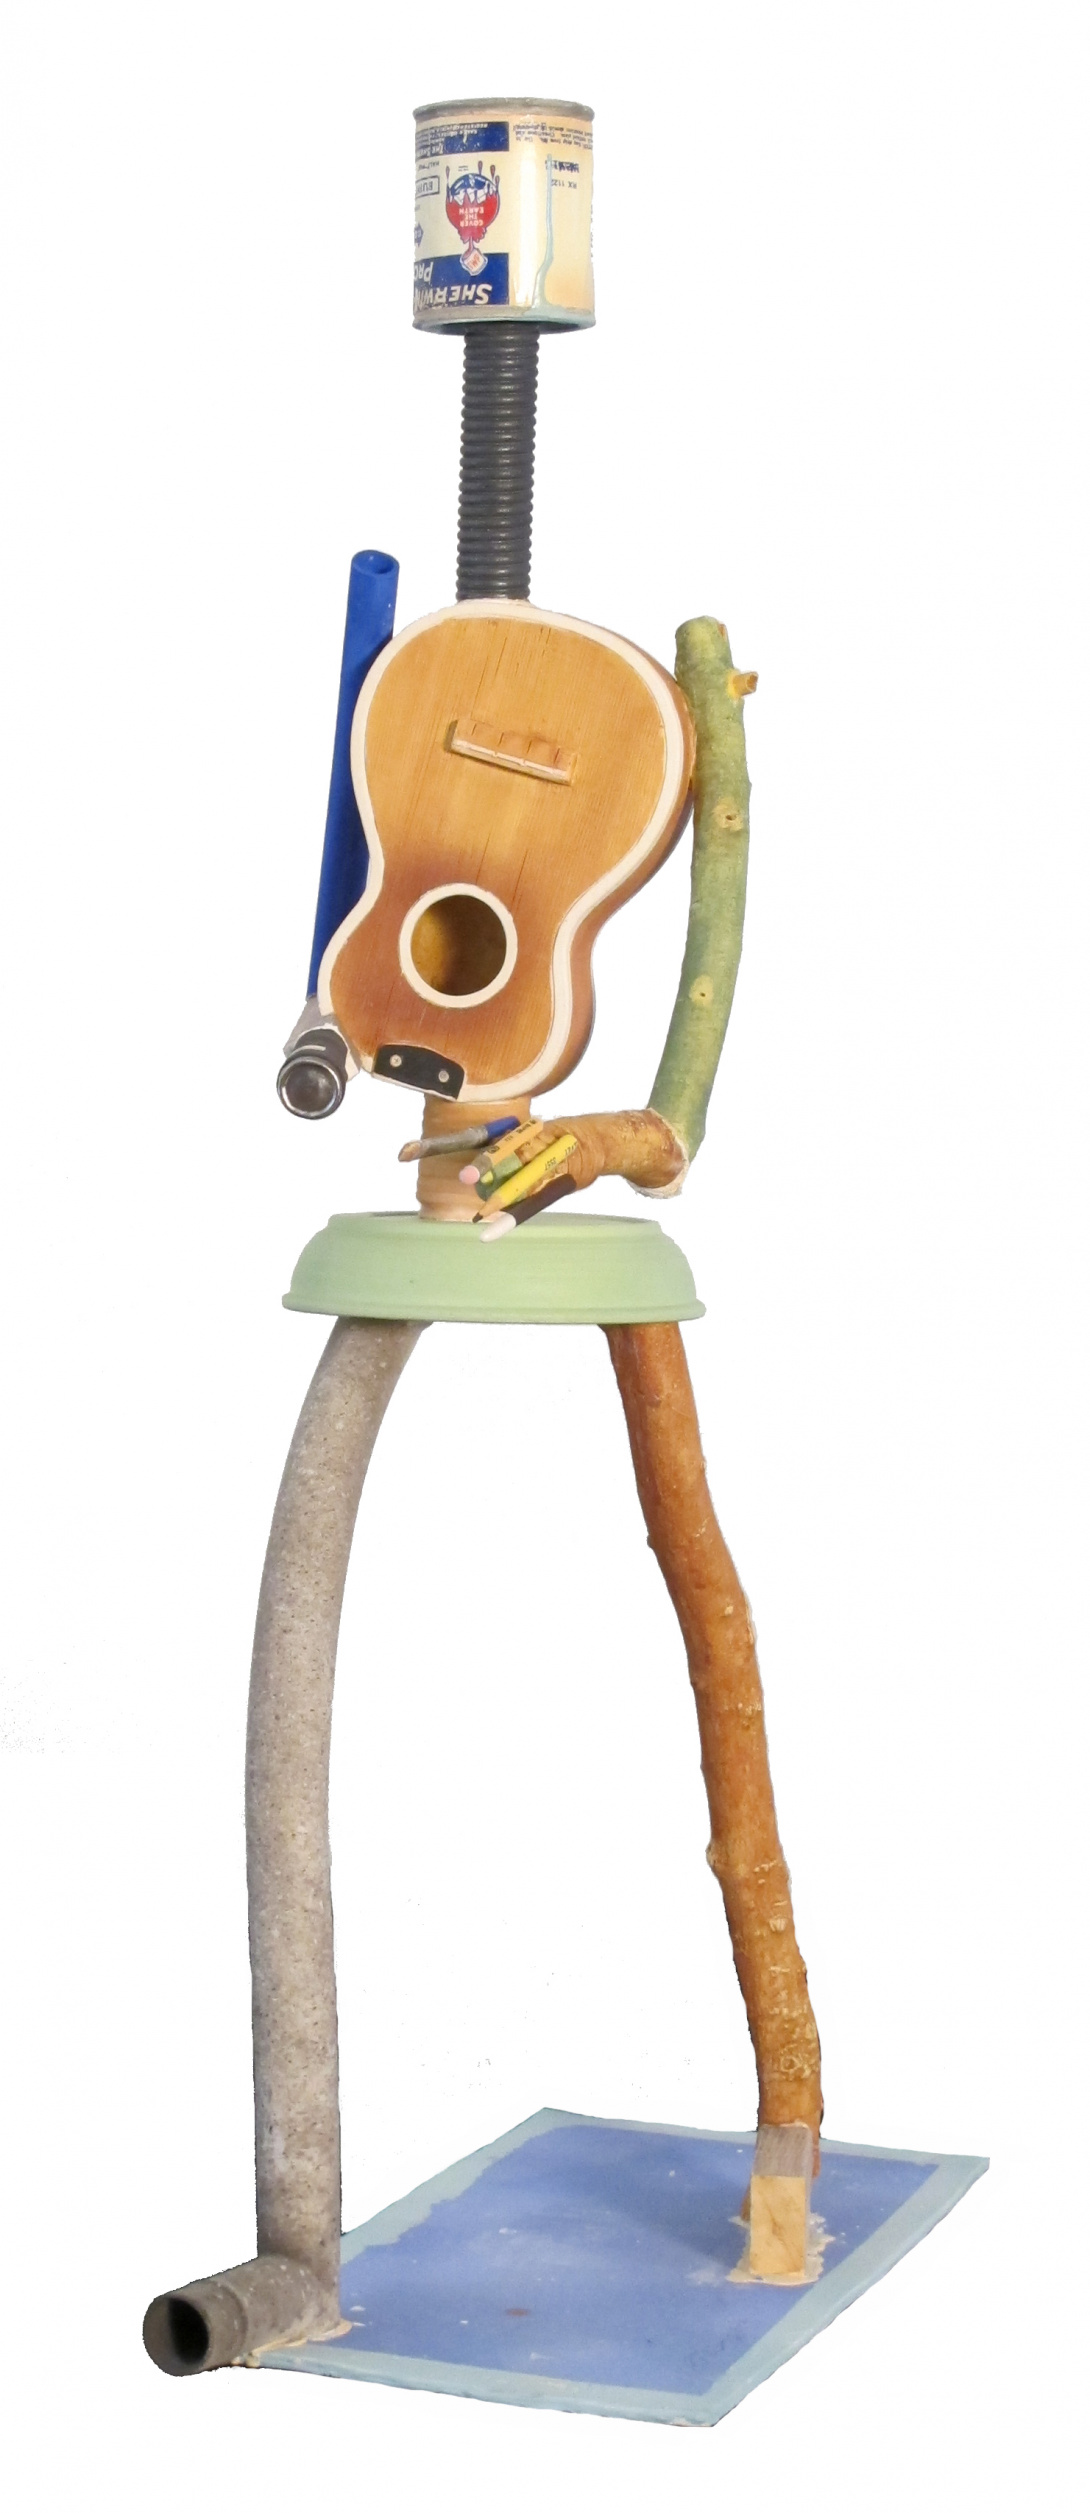 A porcelain sculpture consisting of various objects resembling a human. A can is the head, a black coiled tube is the neck, a guitar is the body, a bowl are hips, and the legs and arms are represented through a piece of wood and skinny metal tube.